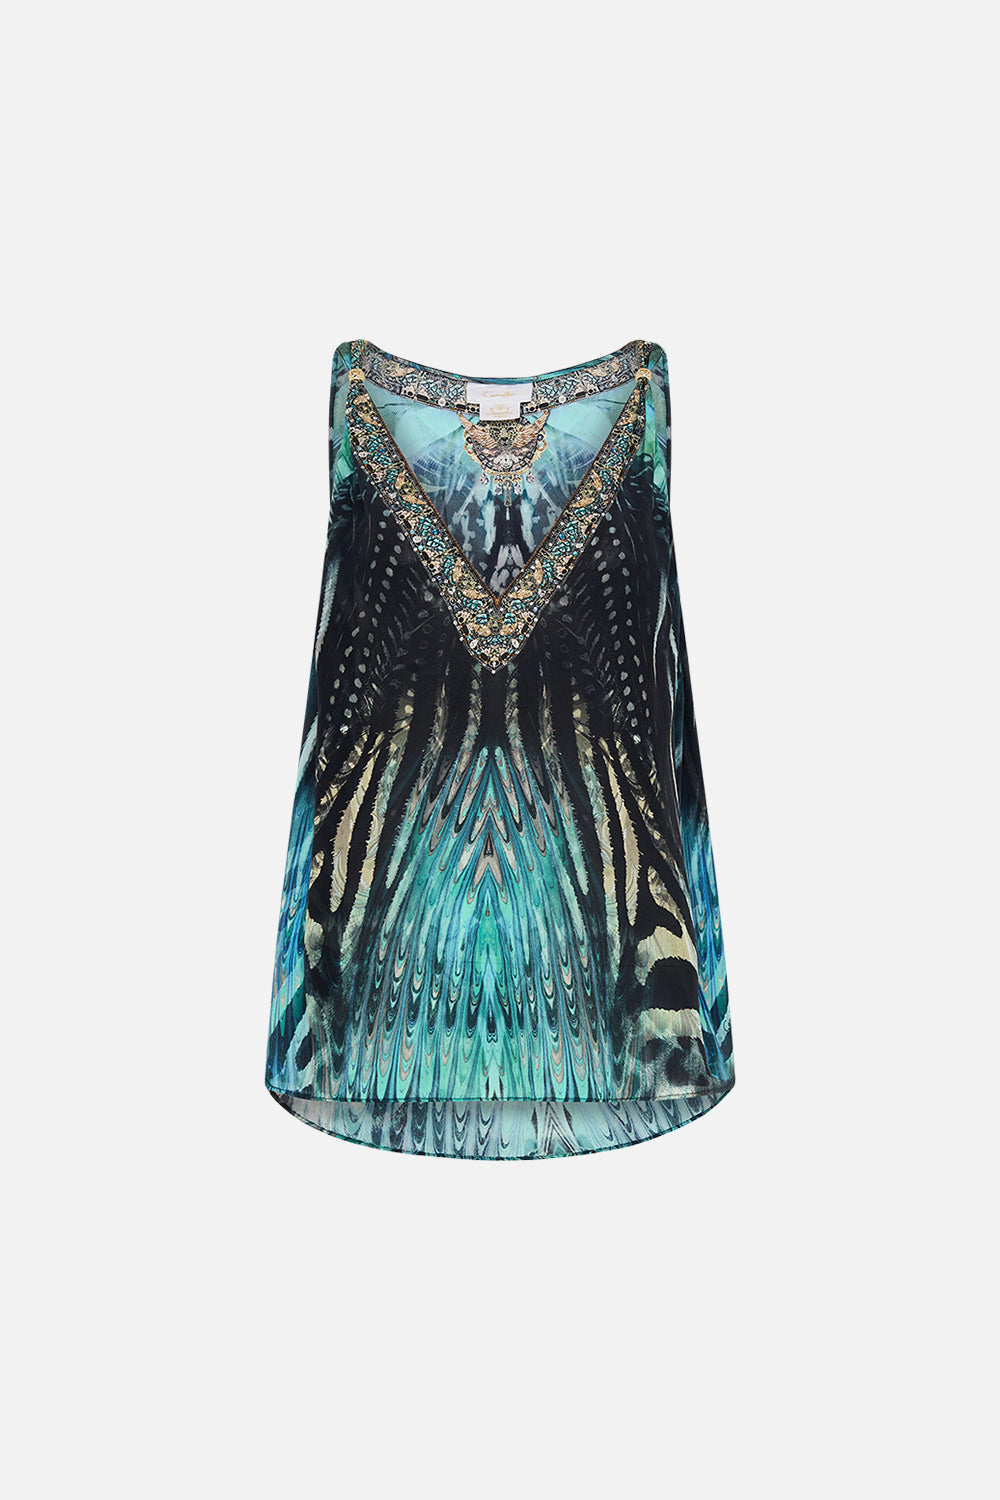 Product view of  CAMILLA silk tank top in Azure Allure print